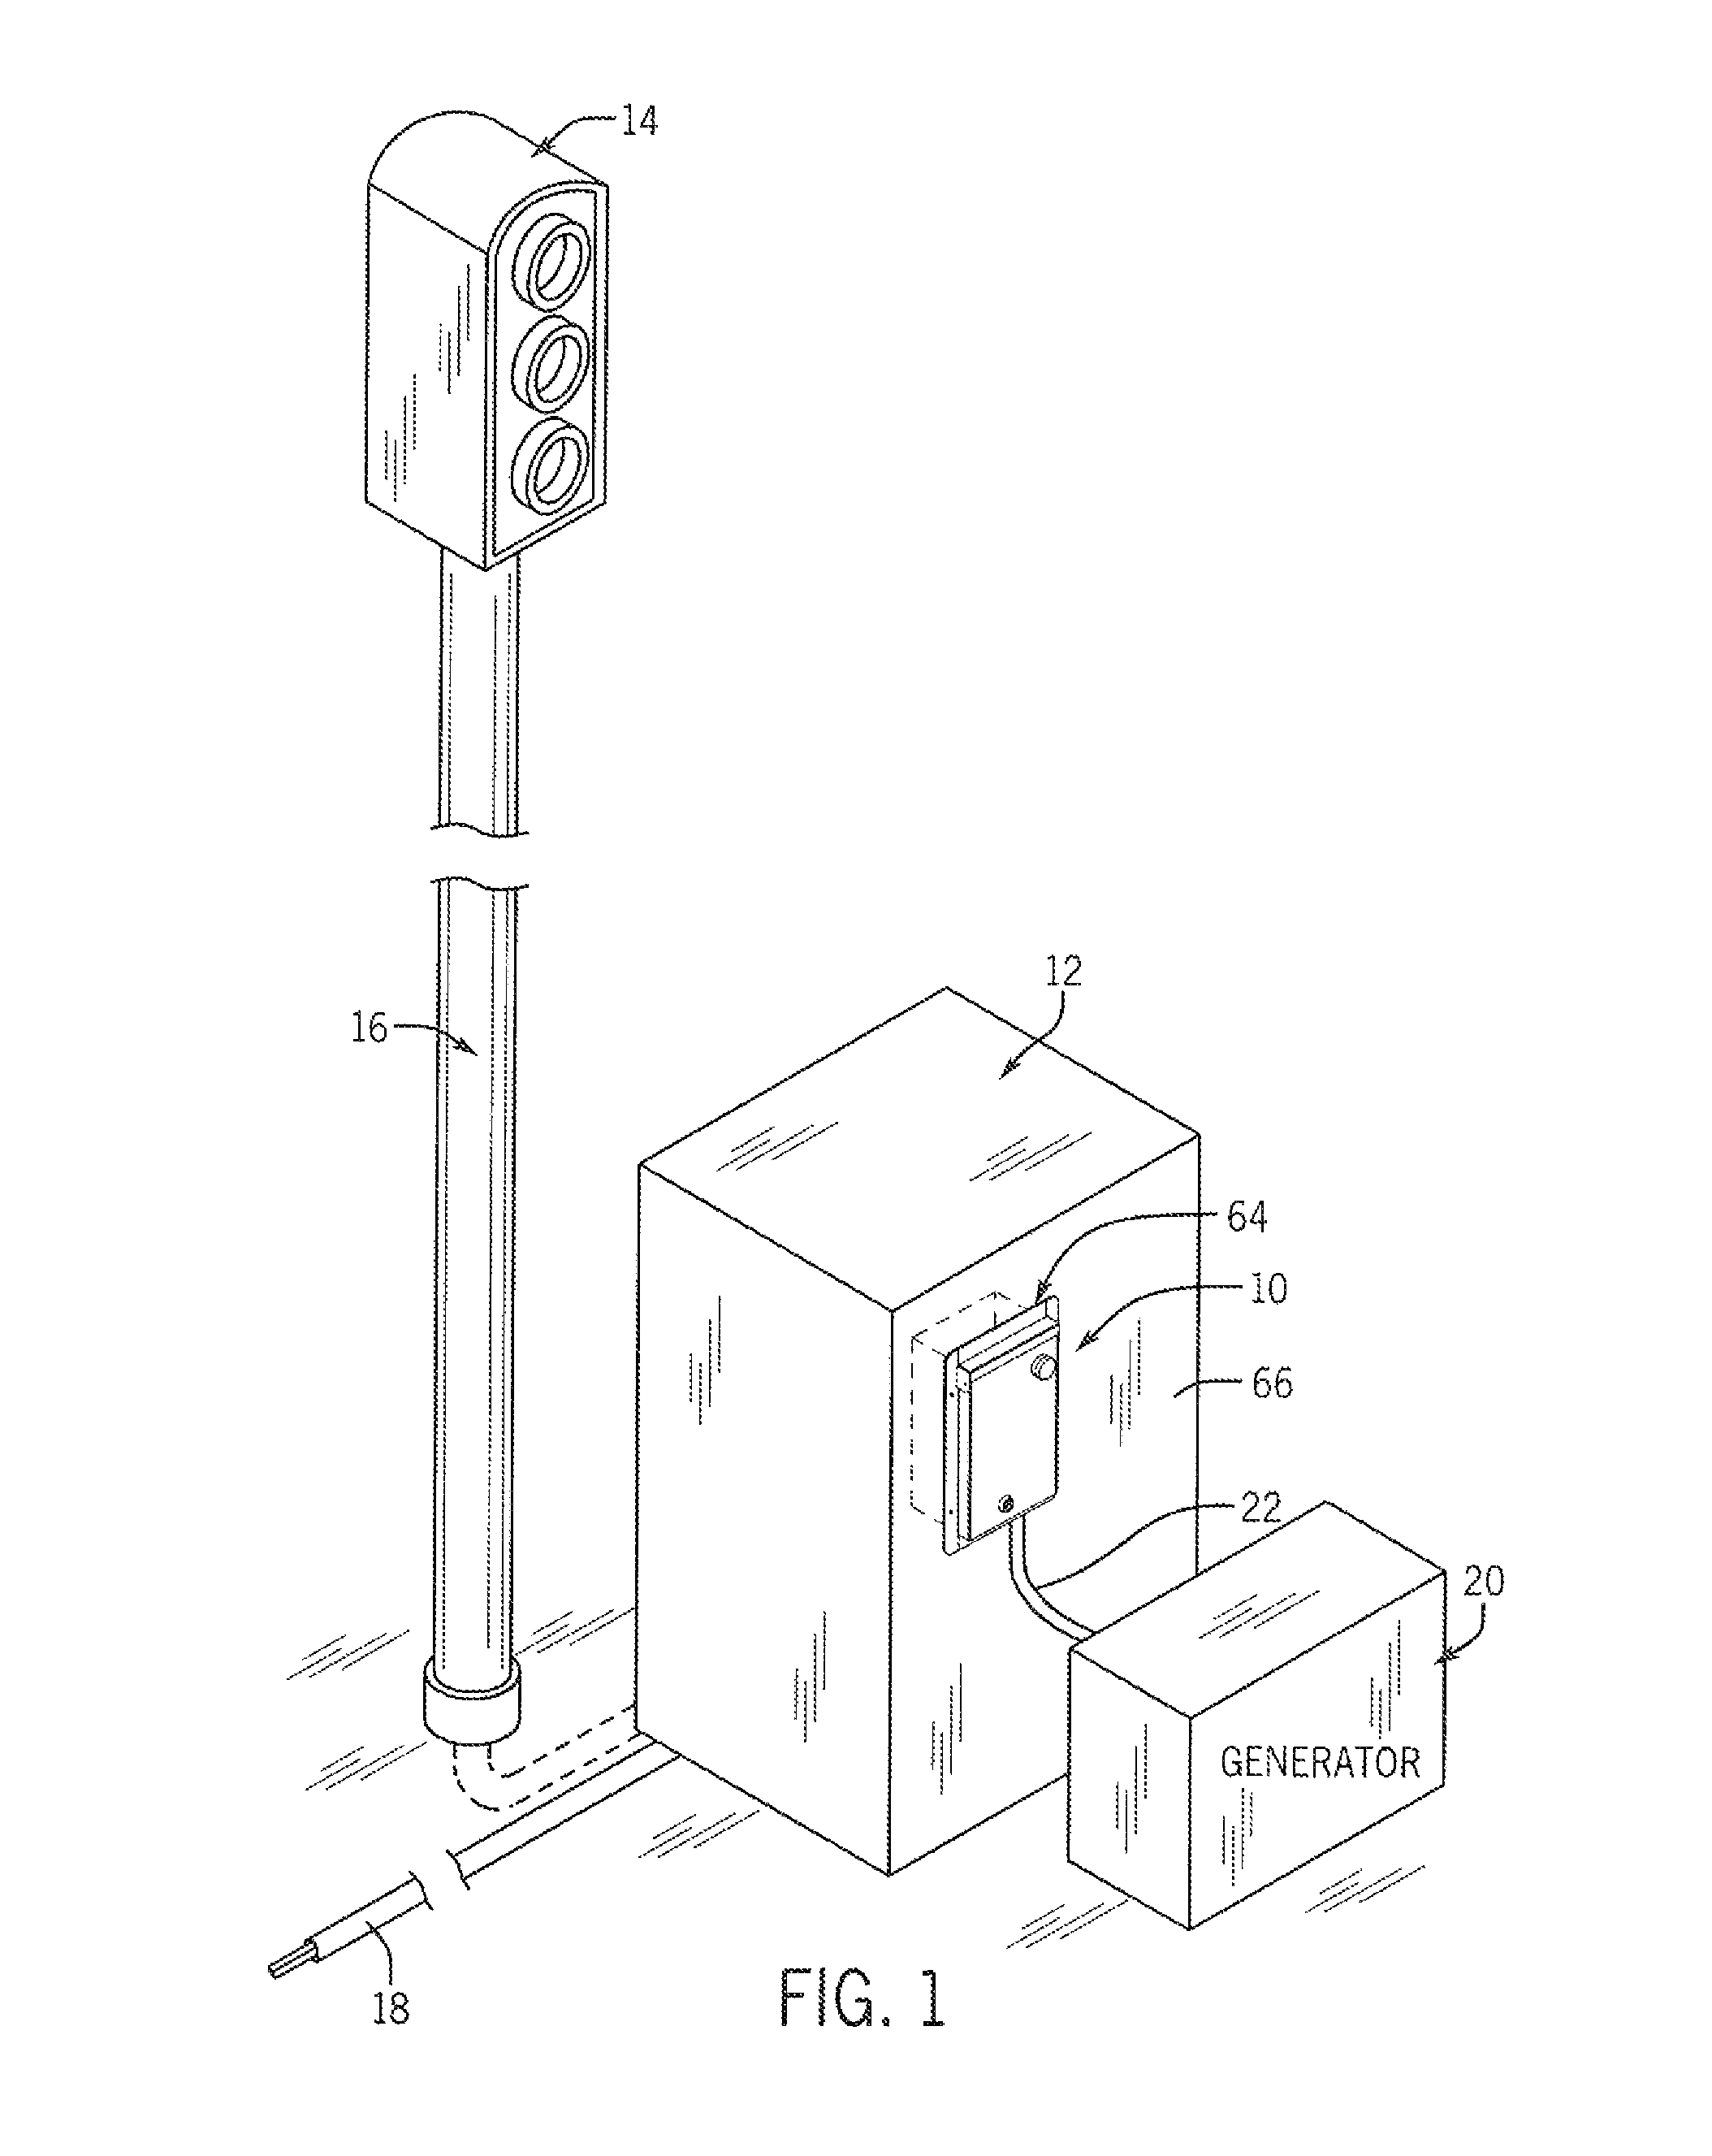 Transfer switch with cover-mounted power inlet